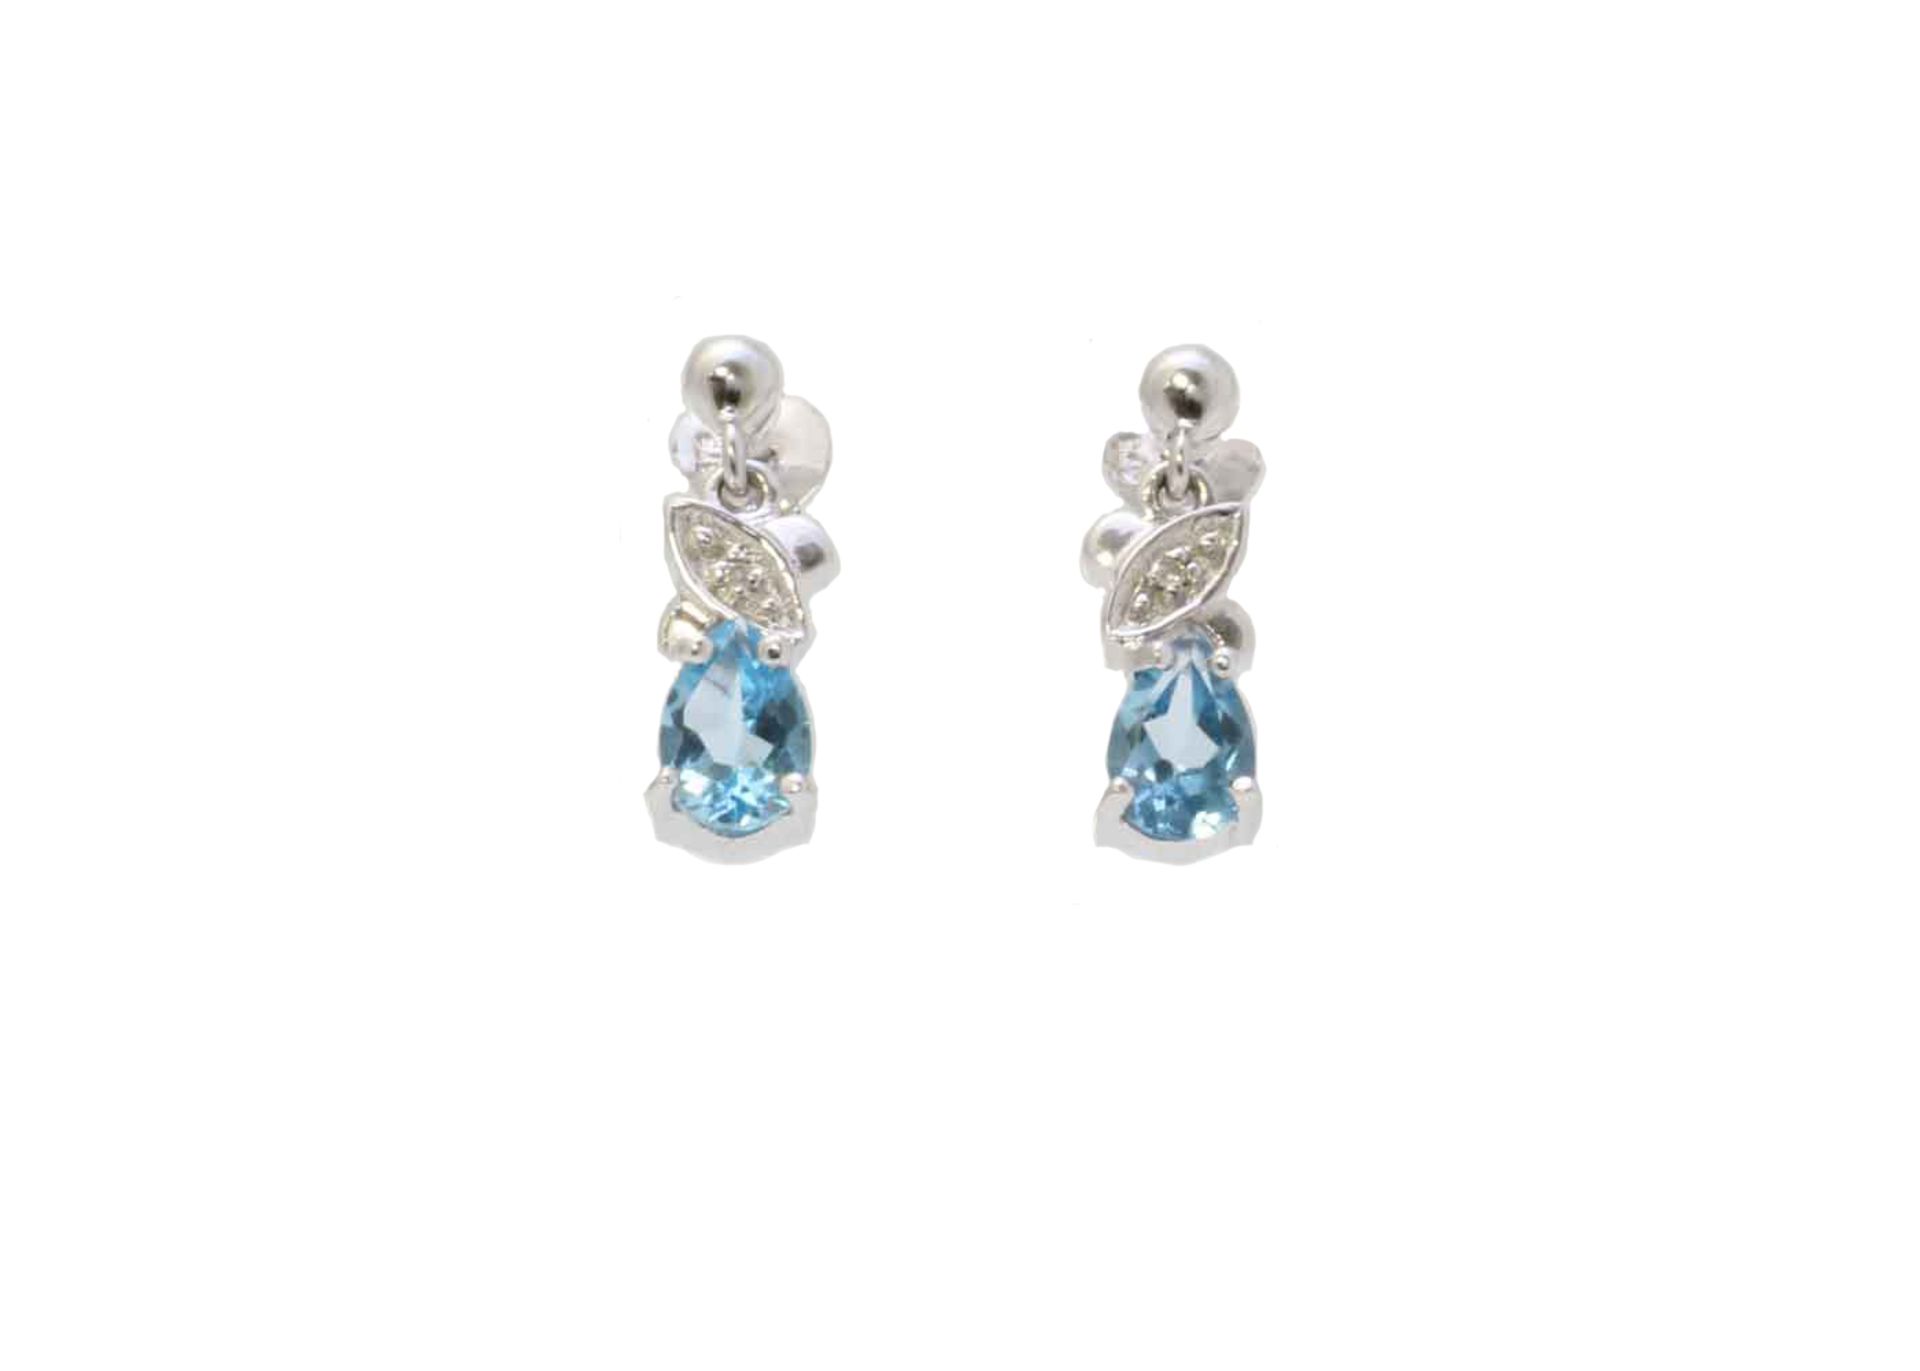 9ct White Gold Diamond And Blue Topaz Earring 0.01 Carats - Valued by GIE £1,045.00 - 9ct White Gold